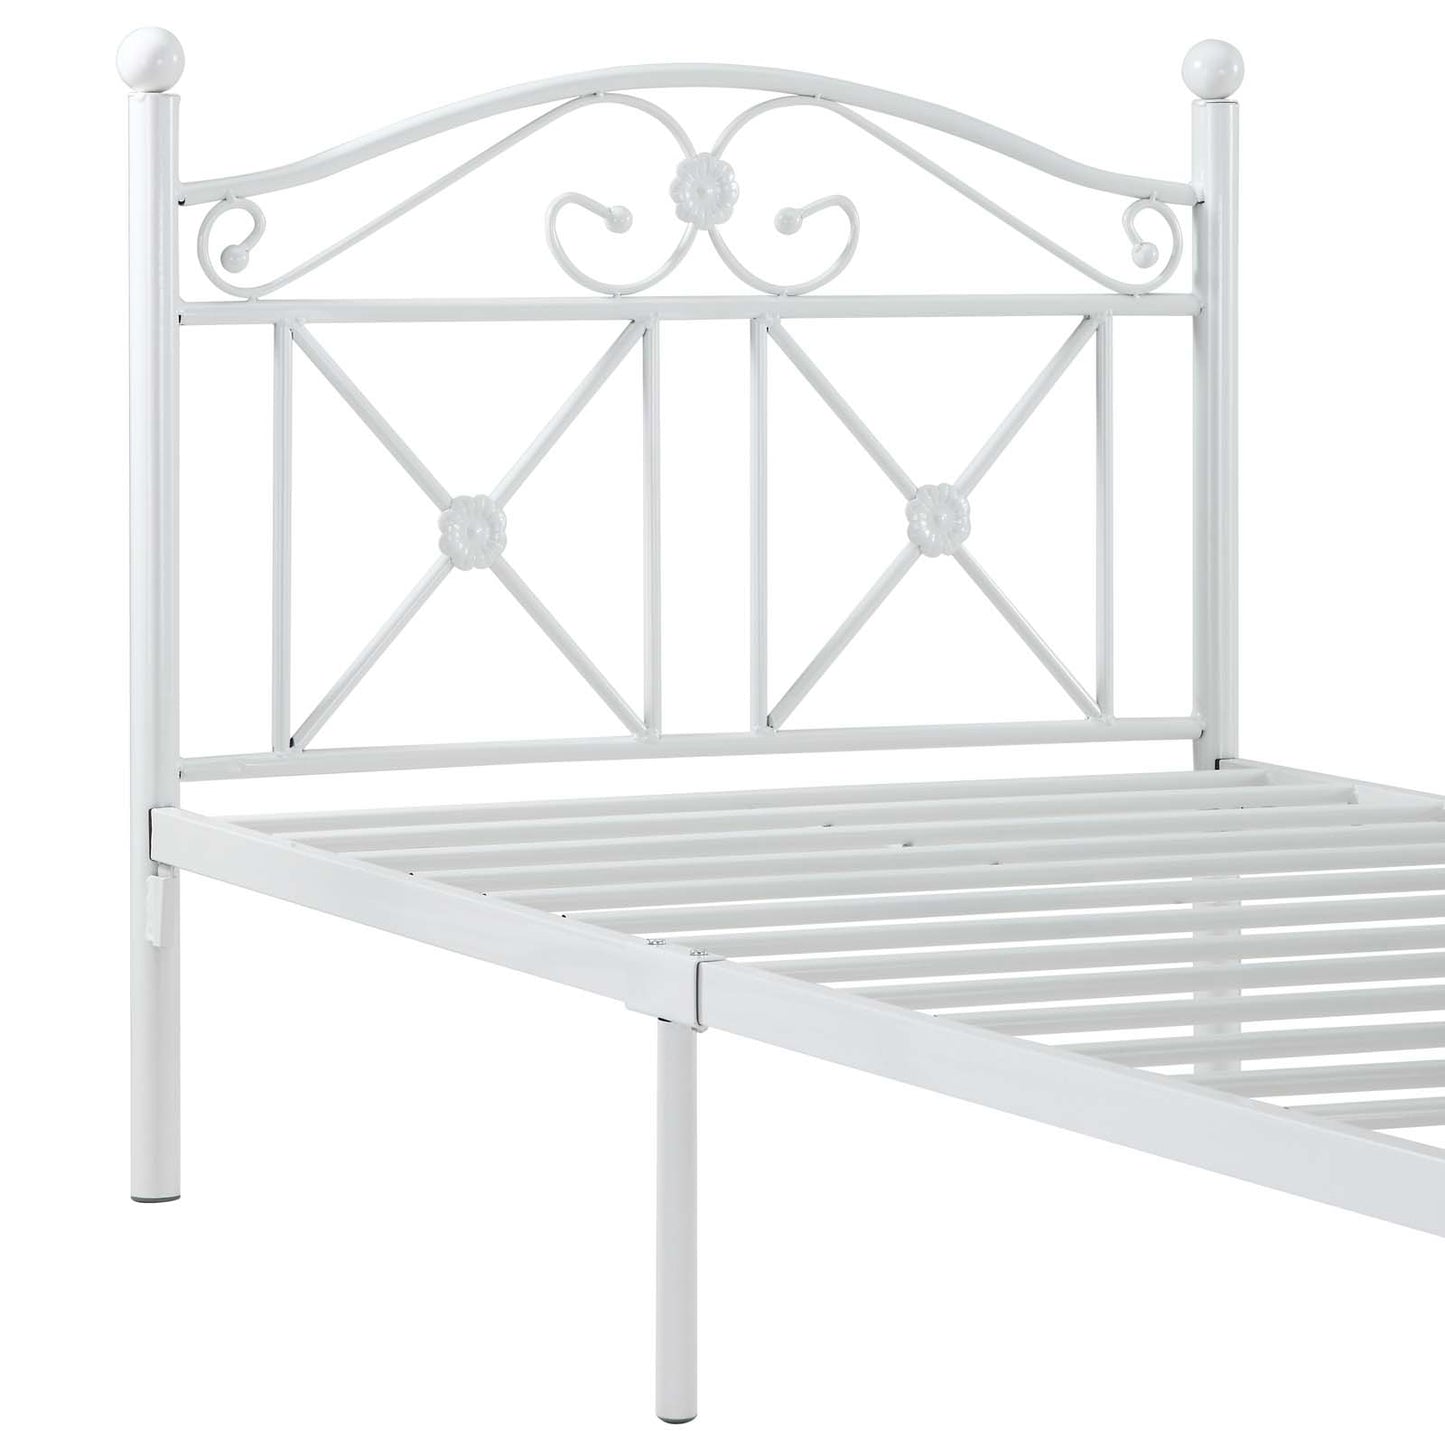 Cottage Twin Bed White EEI-799